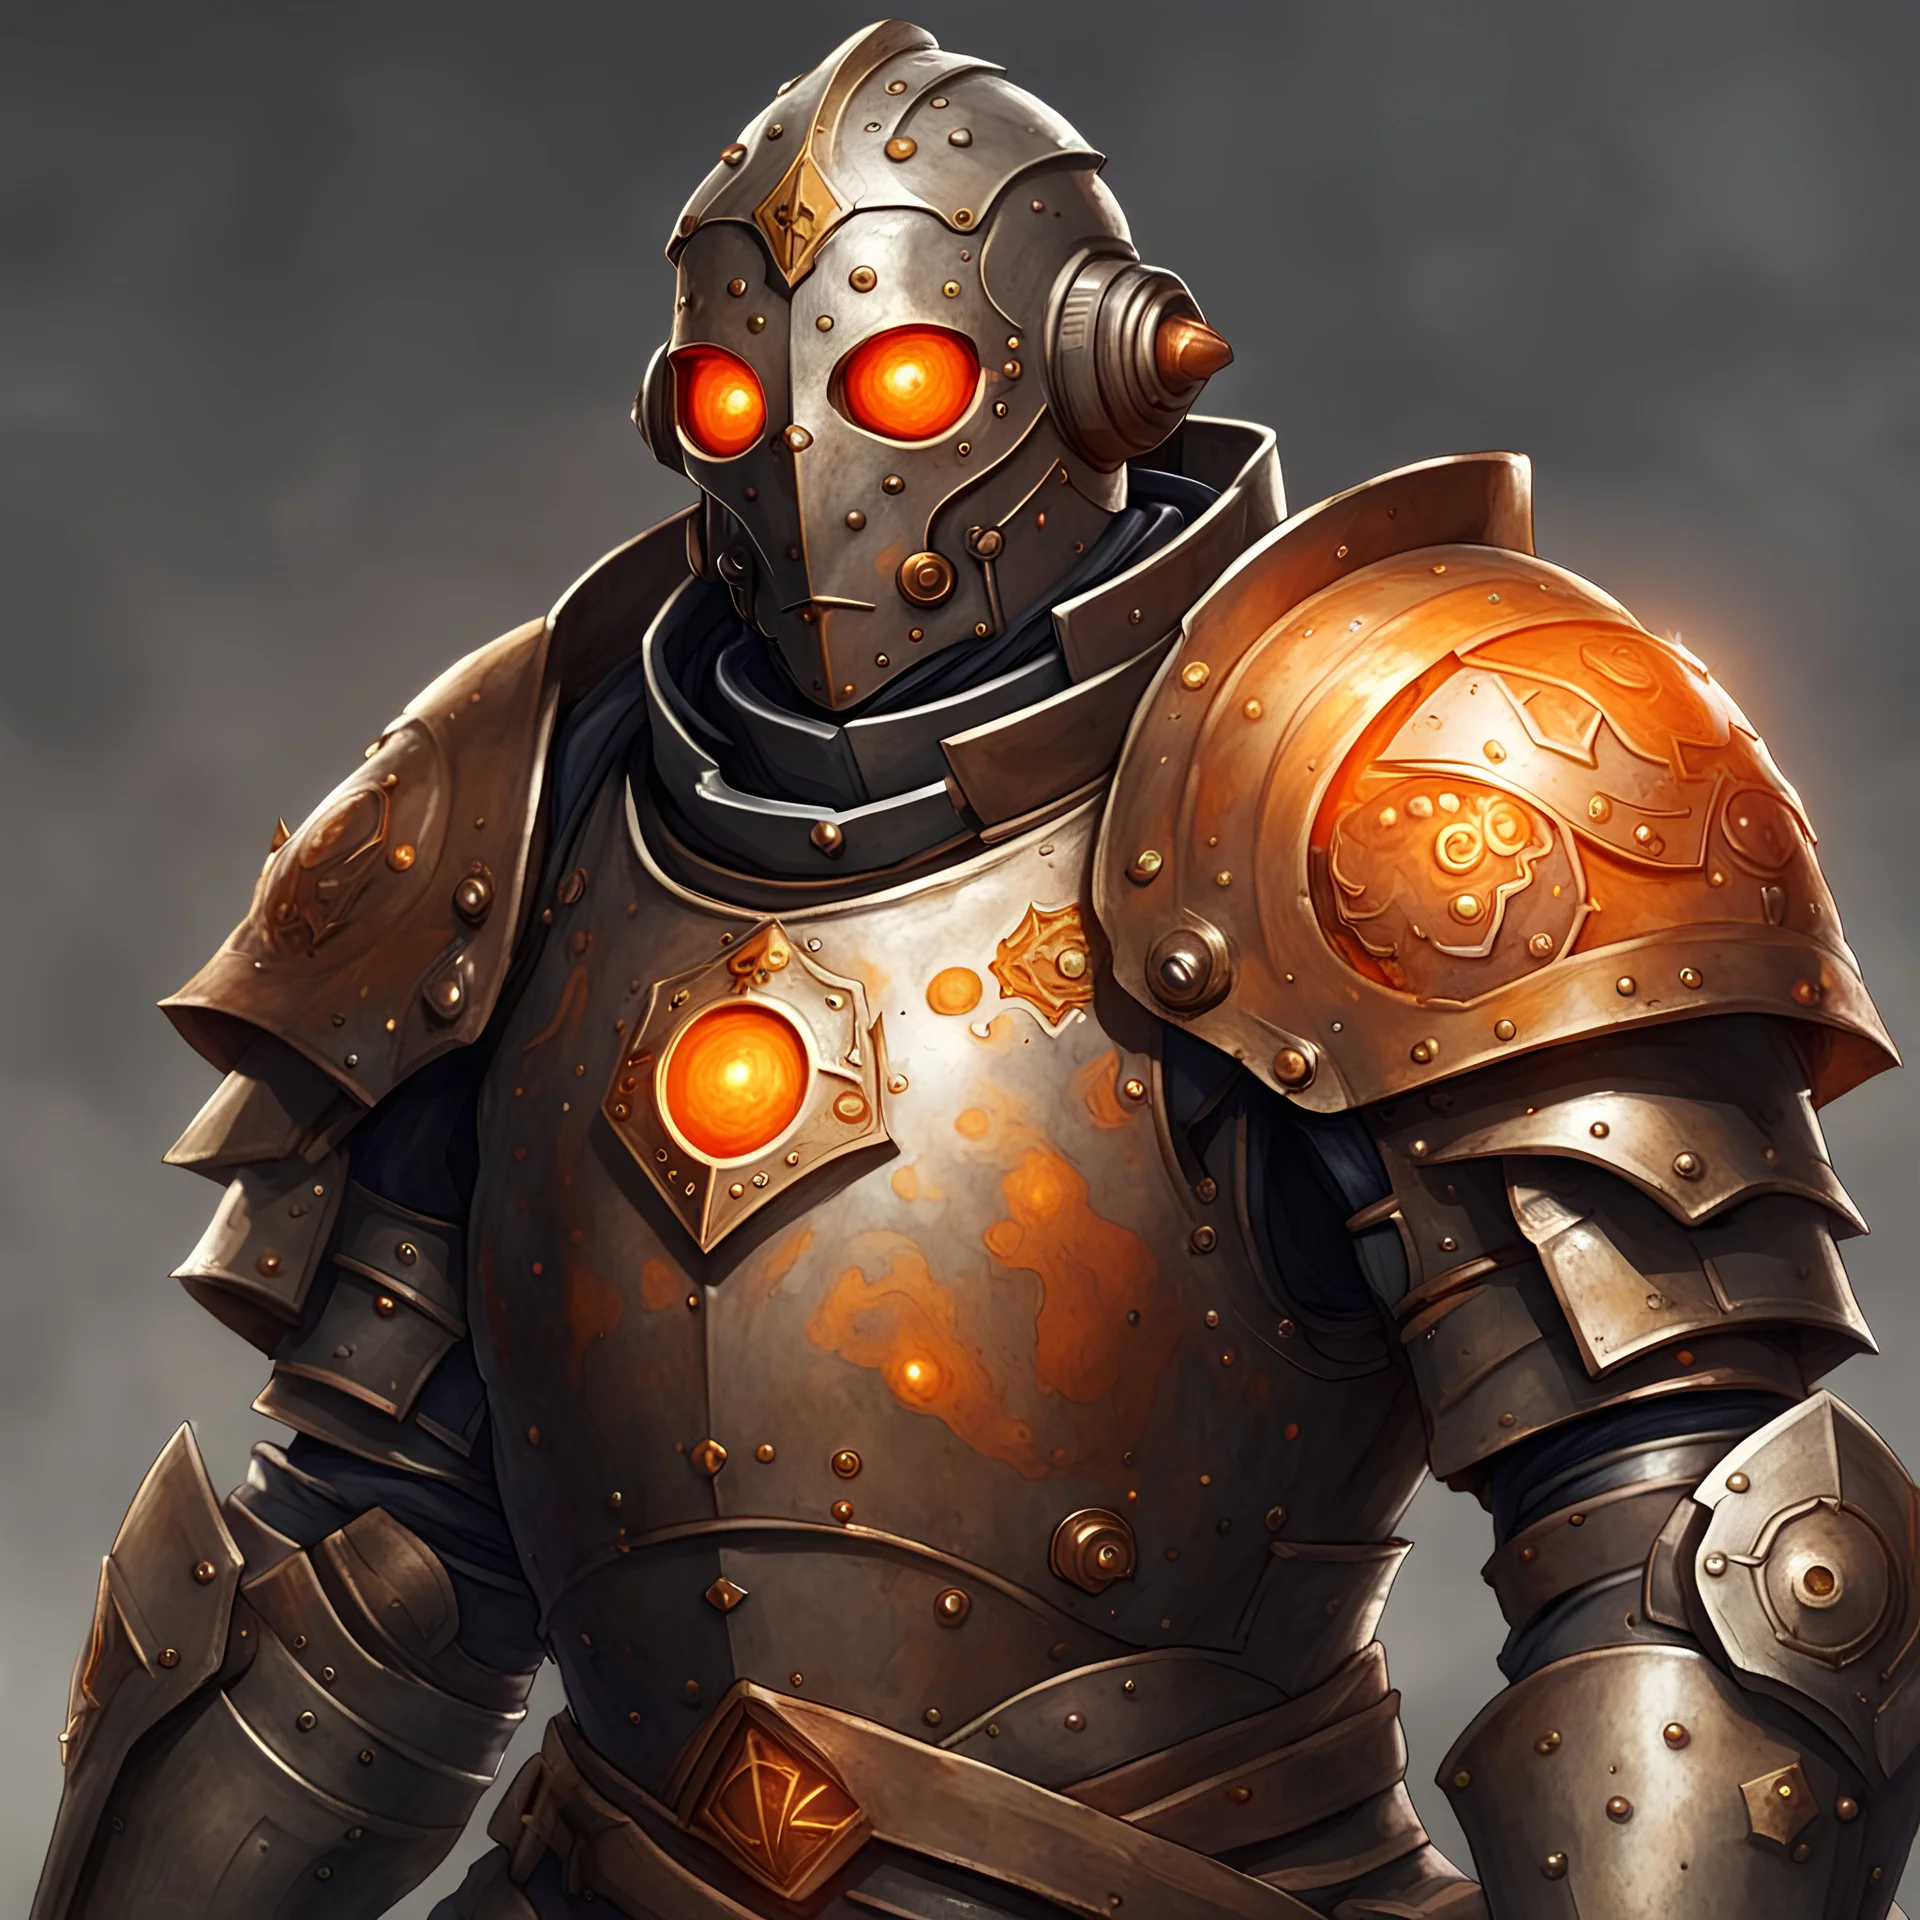 A warforged cleric, with round orange eyes, wearing bronze armor, medieval style, dungeons and dragons